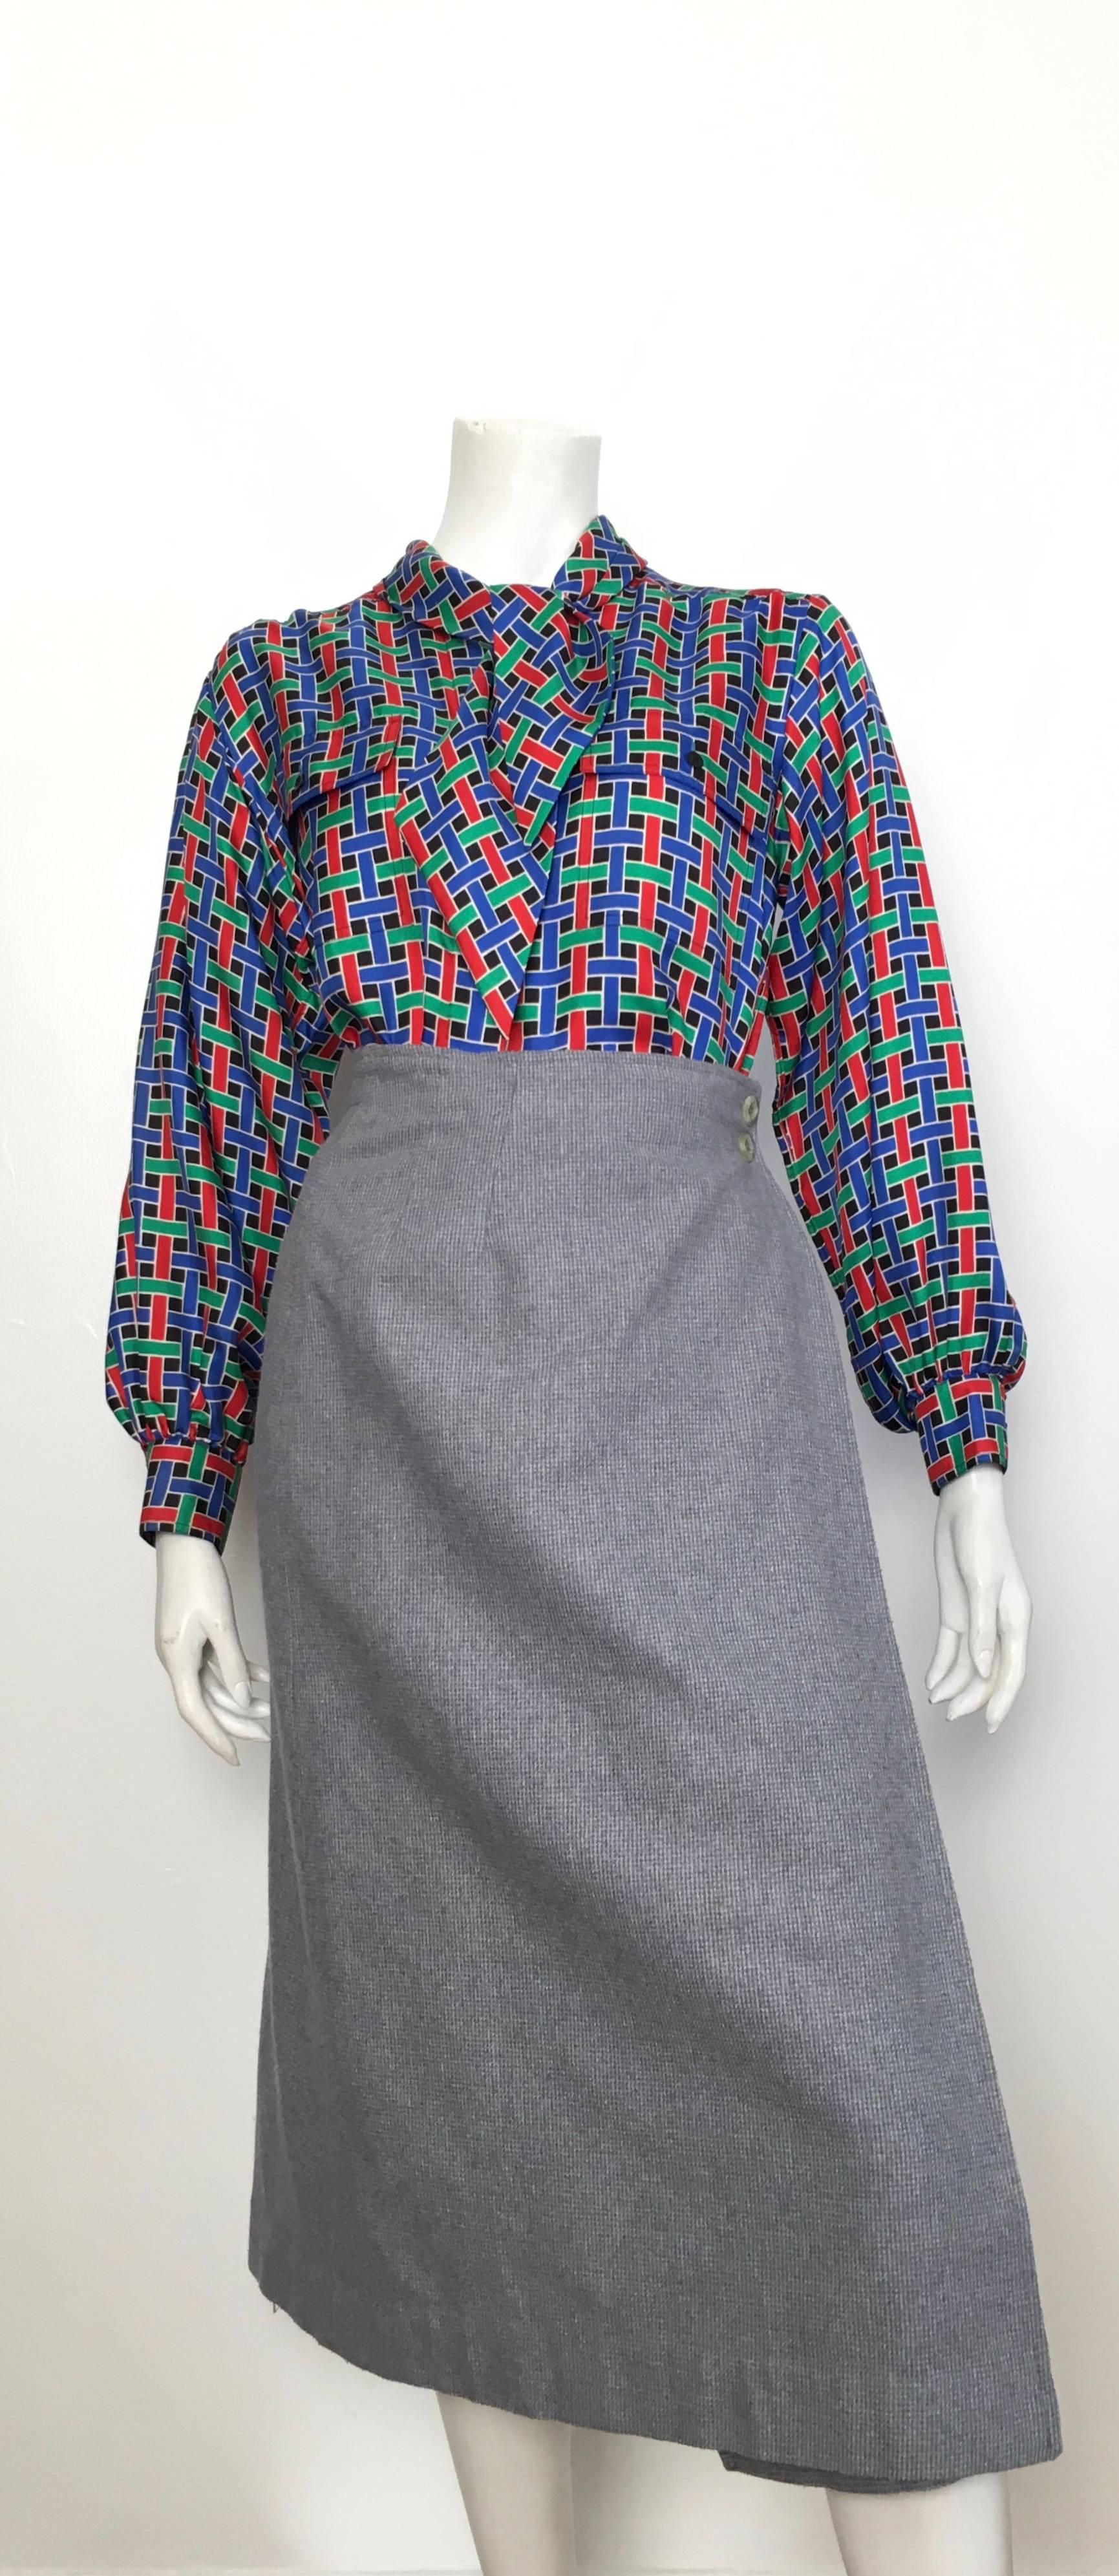 Saint Laurent Rive Gauche 1980s red, blue & green woven pattern blouse is a French size 38 and fits like a size 6 / 8.  This blouse was designed to be big & blousy so it is supposed to fit loose & flowing. This piece was purchased by my client at